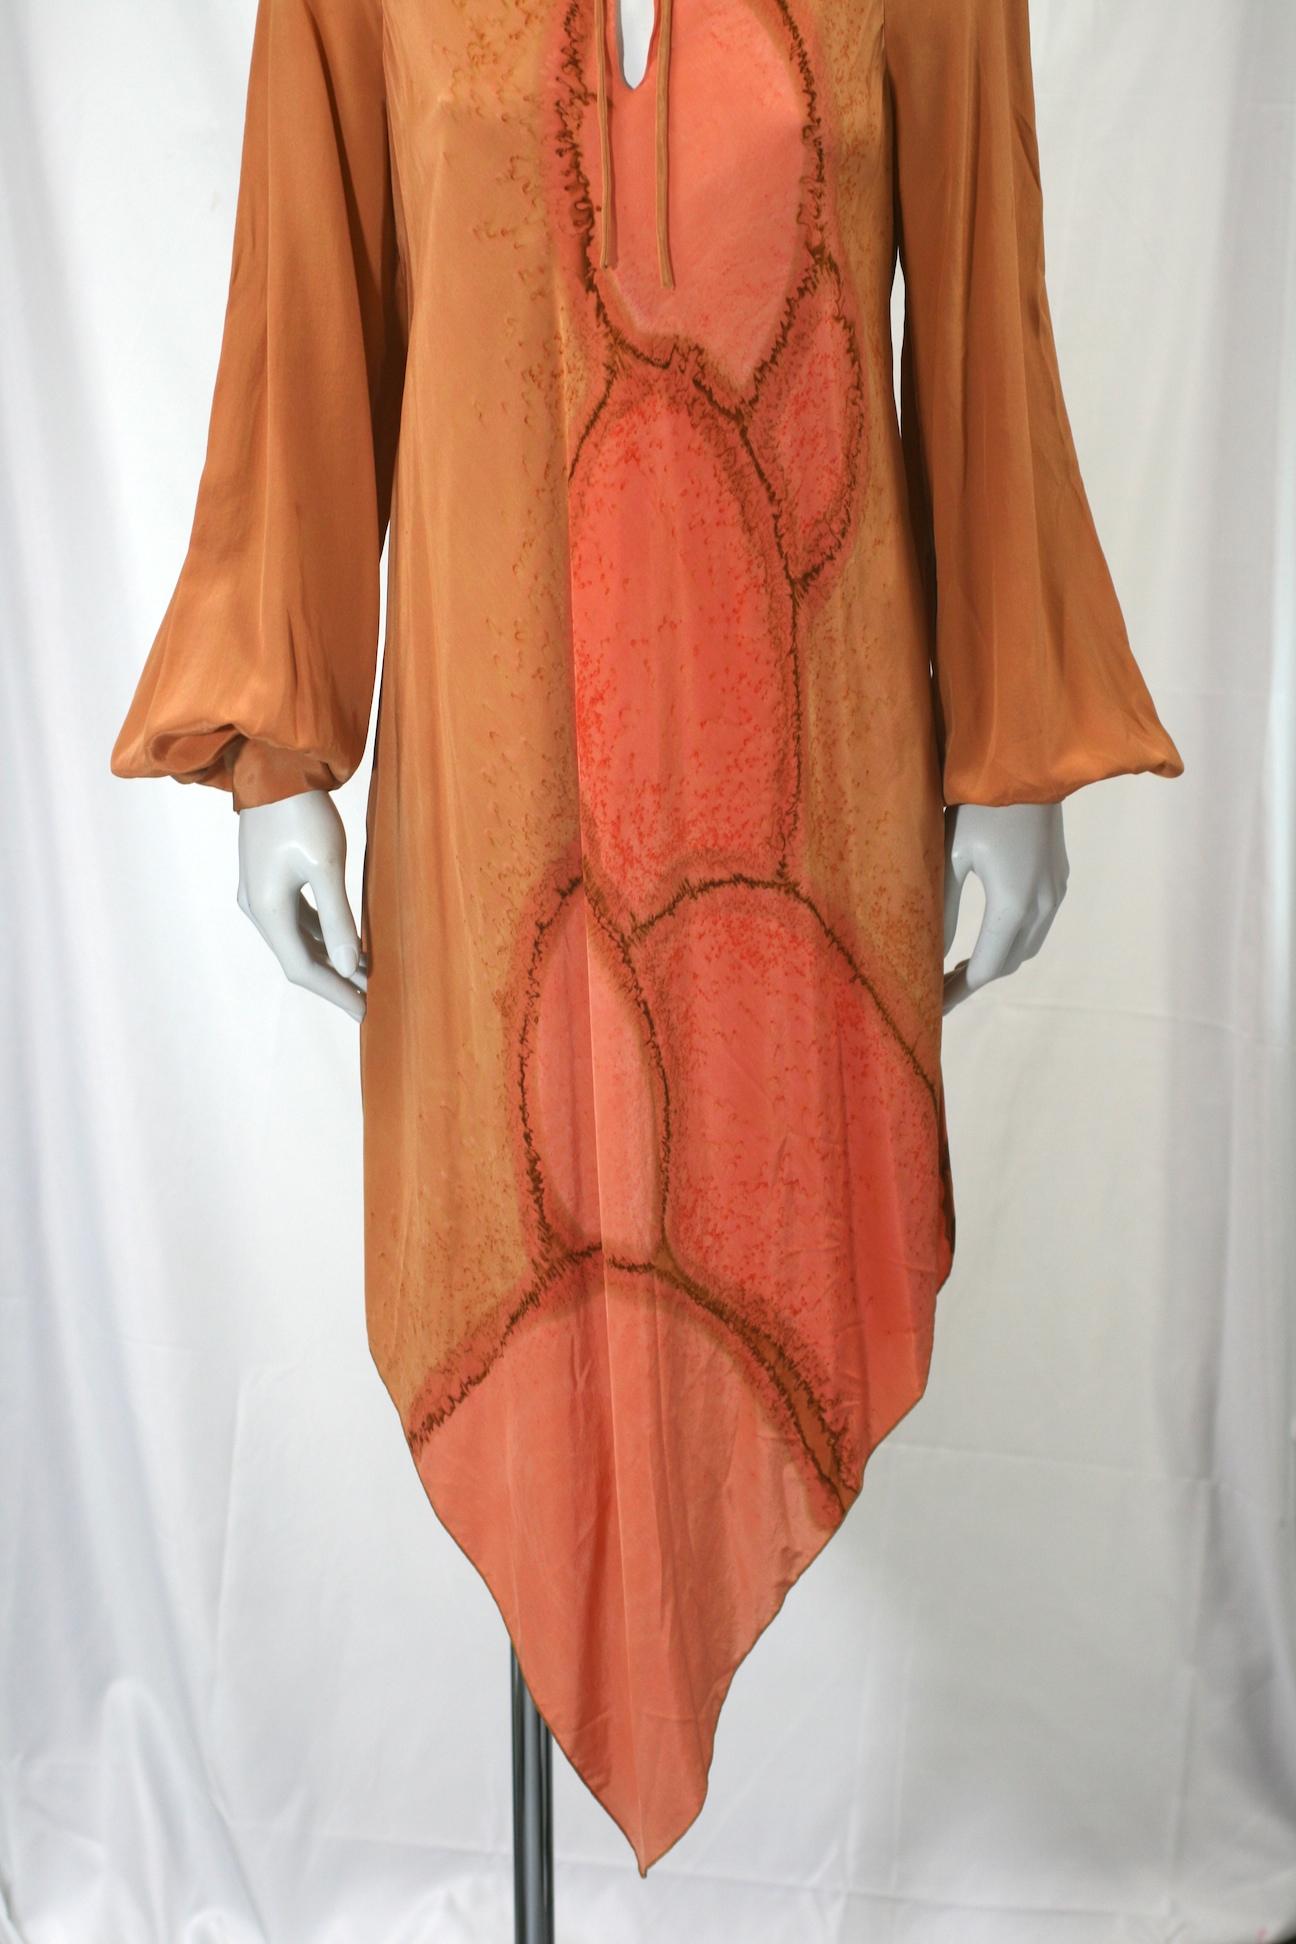 Autumnal tie dye silk crepe dress with provenance personal wardrobe of actress Lillian Gish.  Hand dyed on a rusty beige ground  with abstract lozenge patterns in varied shades of pale orange, rust and peach.  Self ties at neck with long full bishop